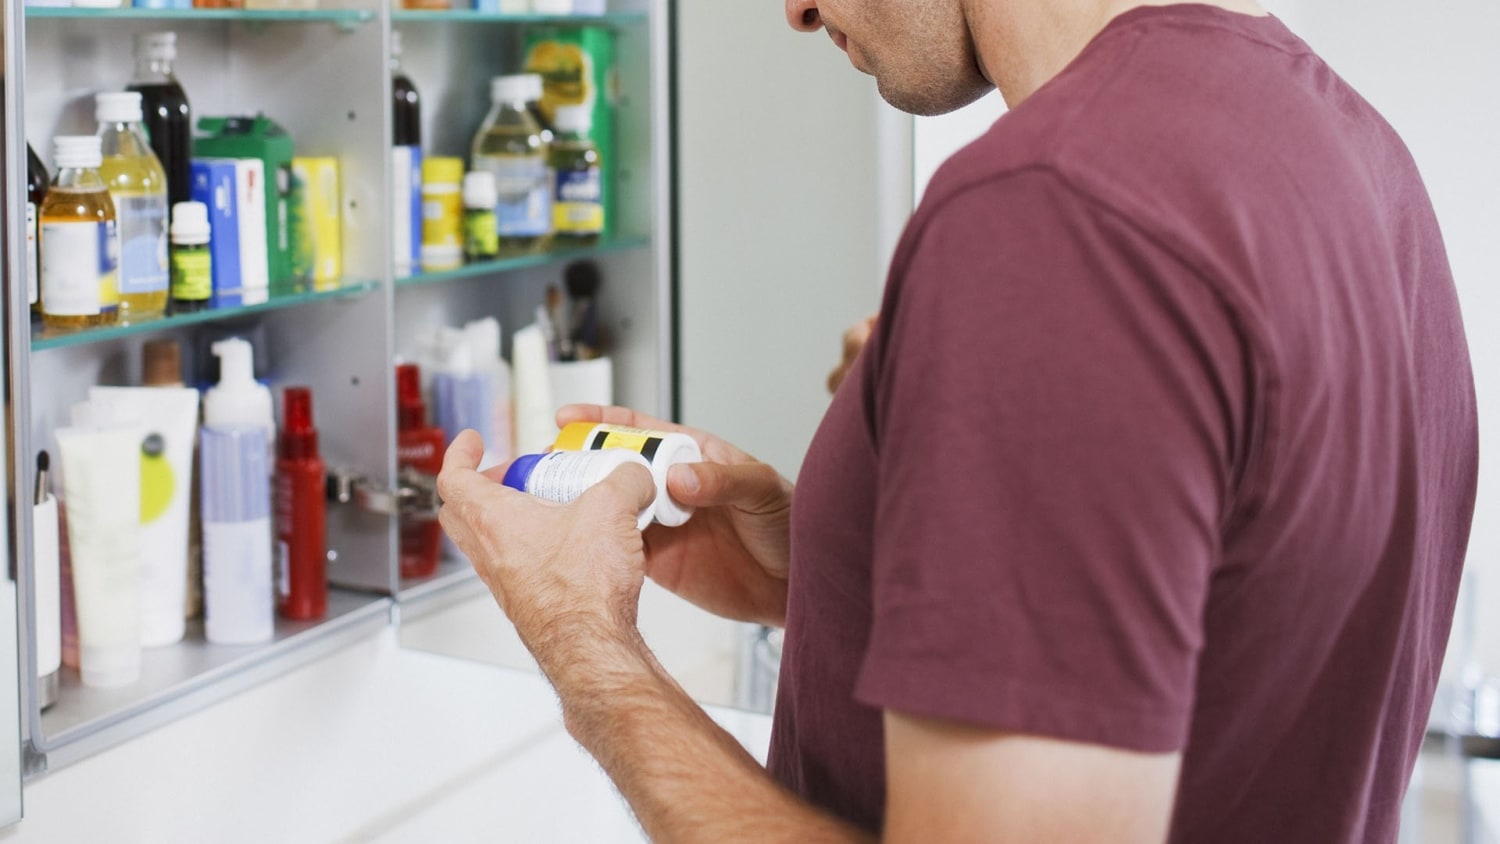 How To Spring Clean Your Medicine Cabinet, According To A Doctor